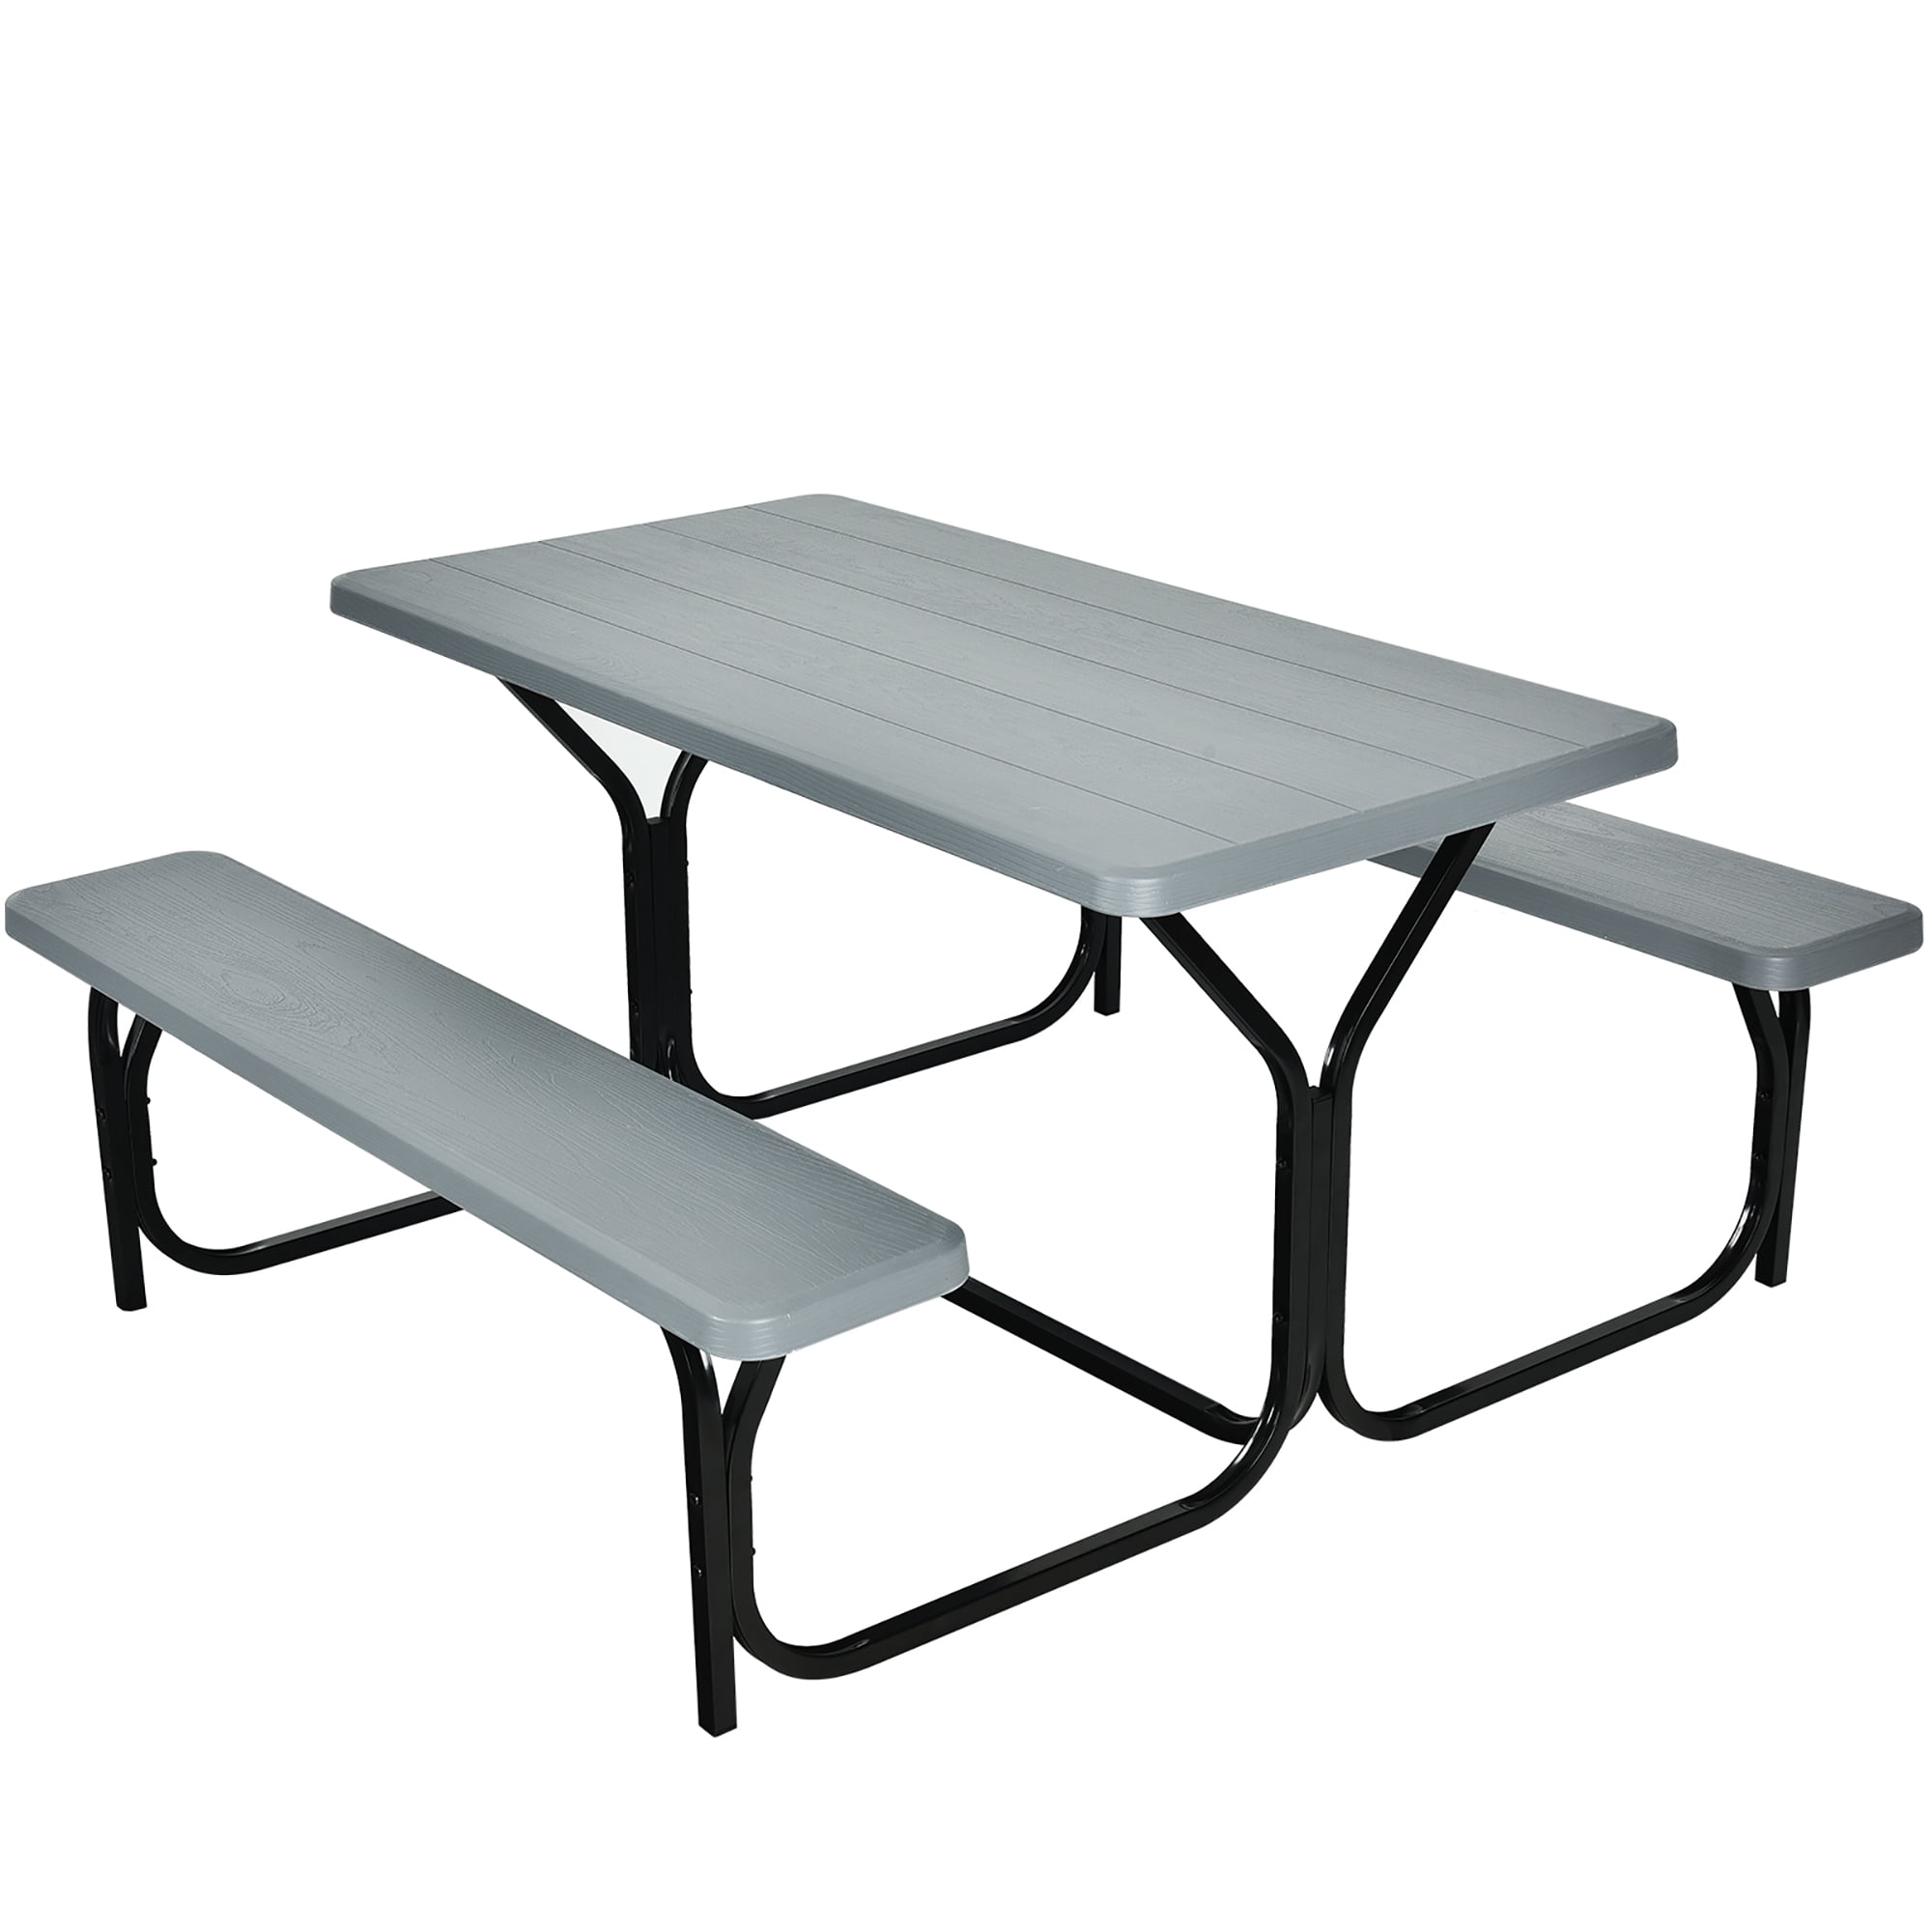 Folding Picnic Table Camping Table 2 Benches Set Outdoor Dining Table Chairs Set 